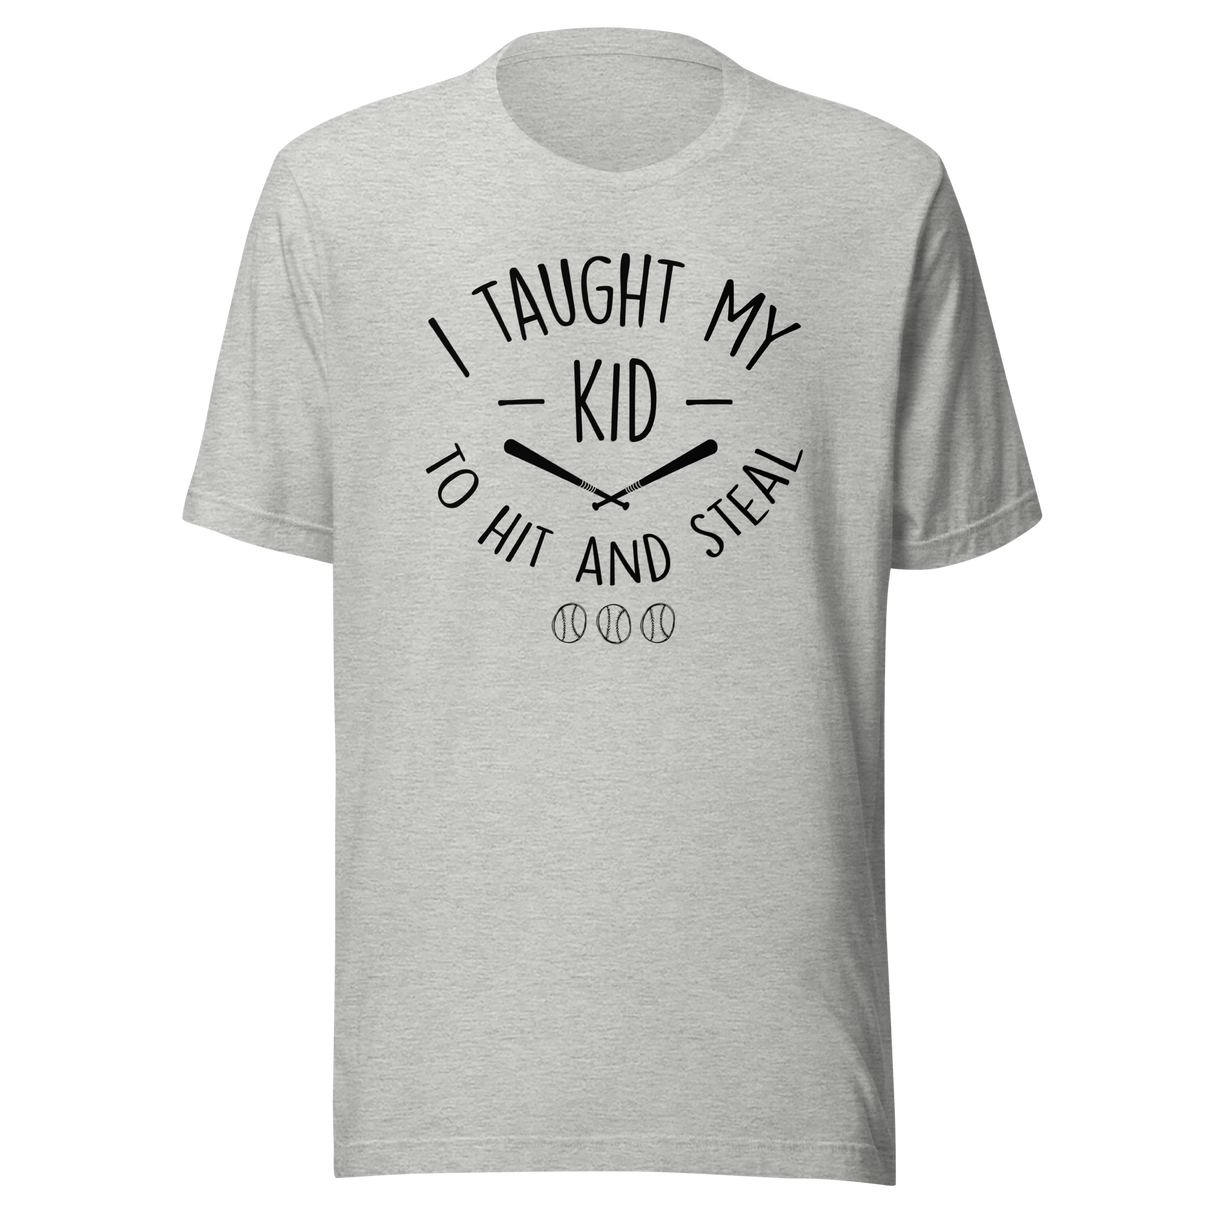 i-teach-my-kid-to-hit-and-steal-sports-tee-baseball-t-shirt-parenting-tee-humor-t-shirt-coaching-tee-1#color_athletic-heather